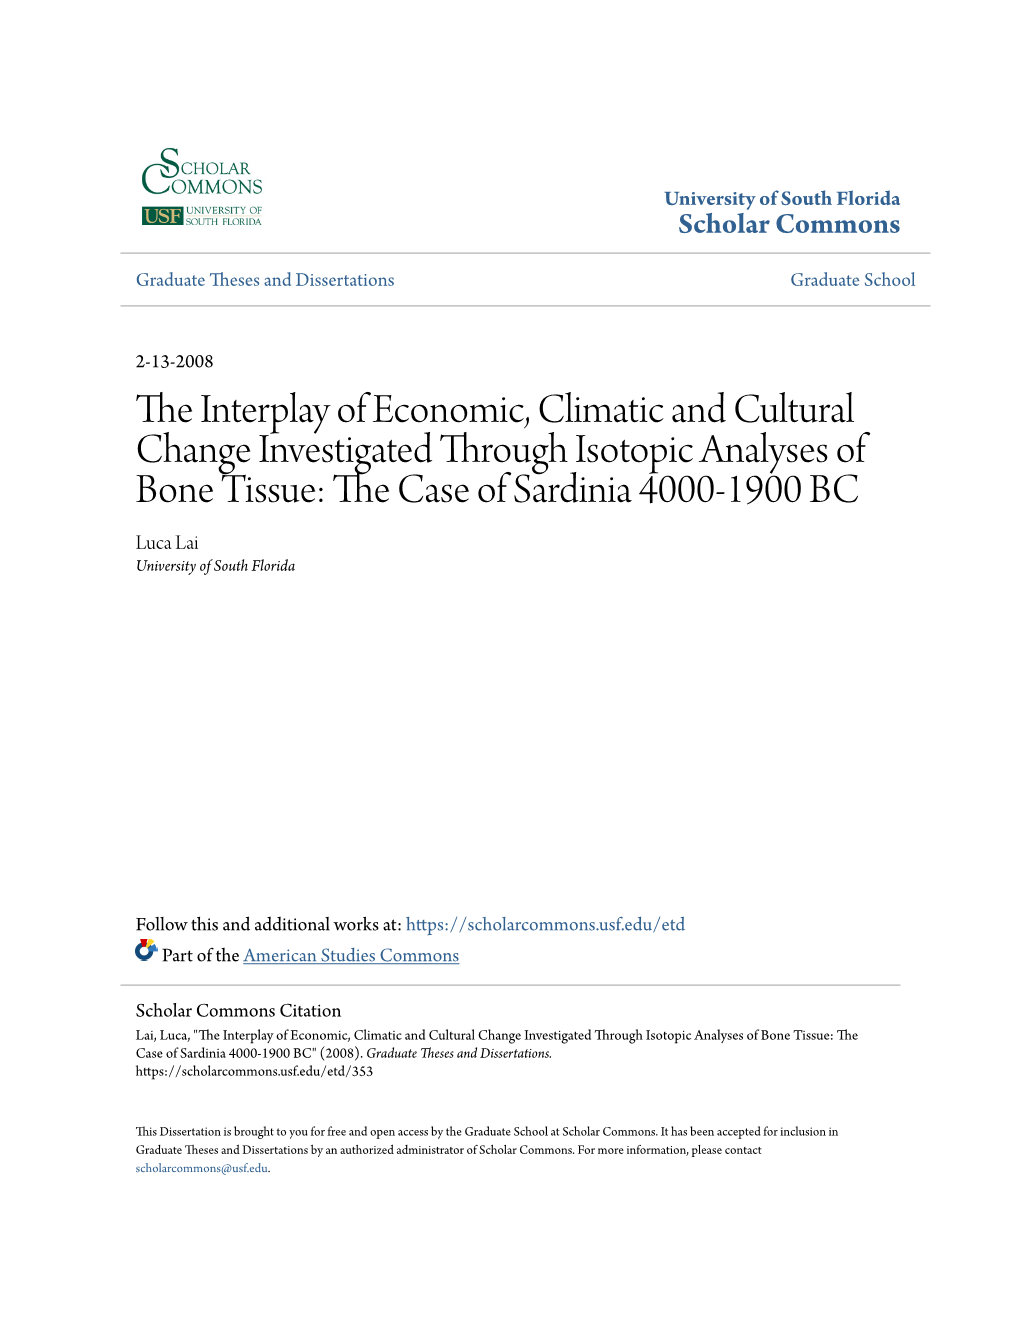 The Interplay of Economic, Climatic and Cultural Change Investigated Through Isotopic